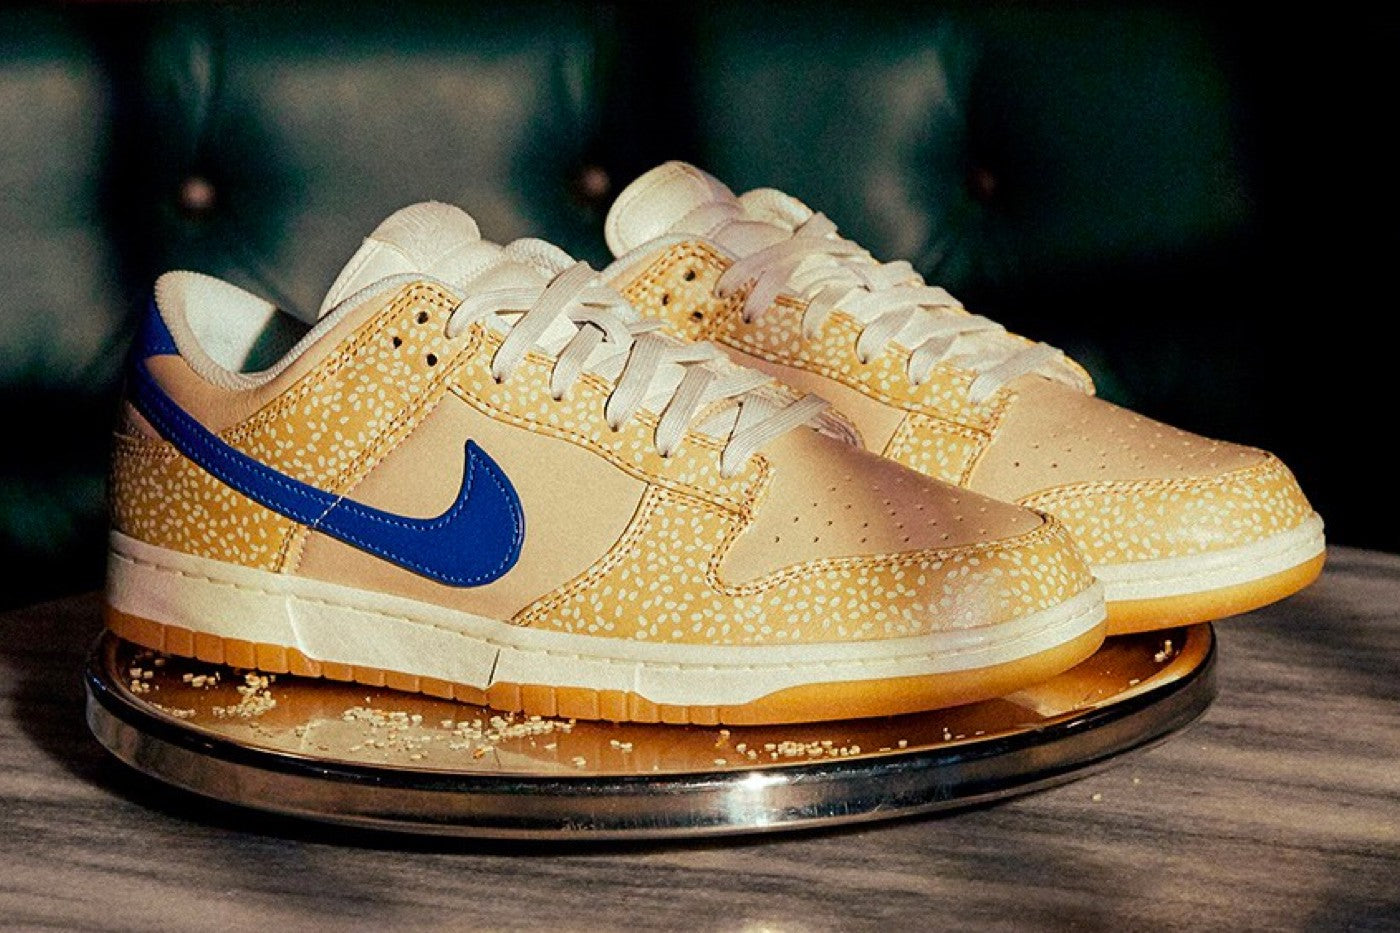 The Nike Dunk Low "Montreal Bagel" is the Perfect Way to Start the Day